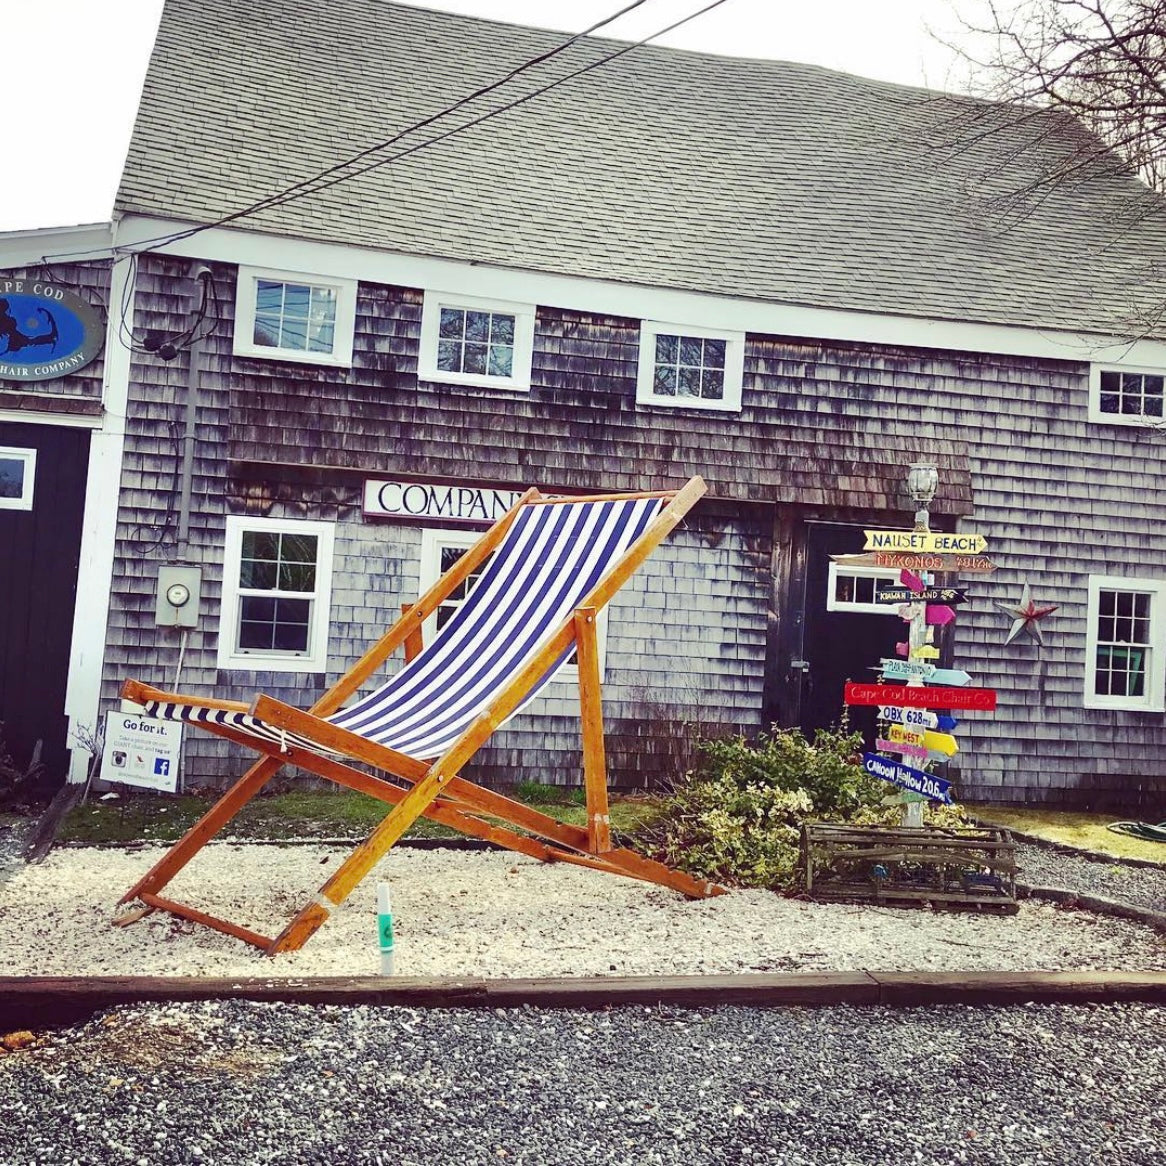 Come visit Cape Cod Beach Chair's retail location, located on the Chatham/Harwich town line